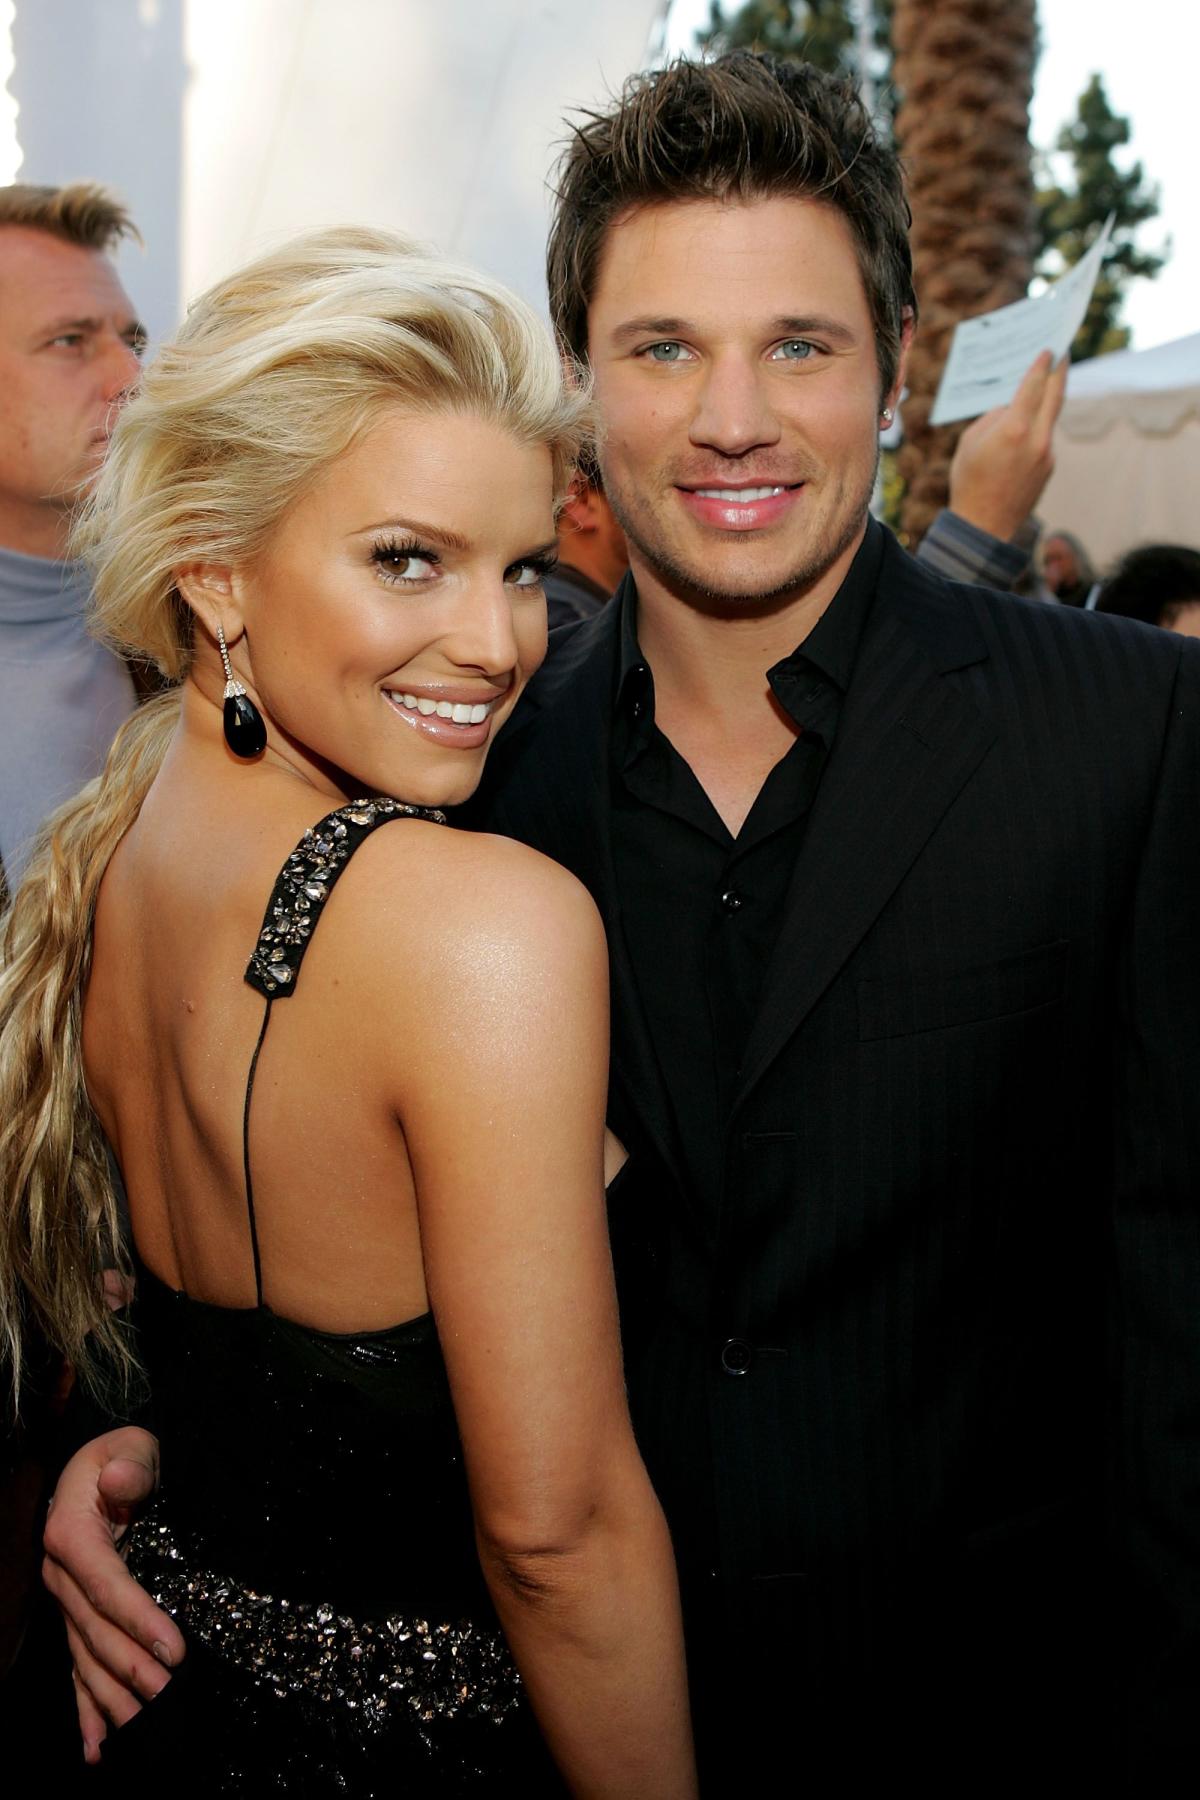 Jessica Simpson and Nick Lachey are engaged